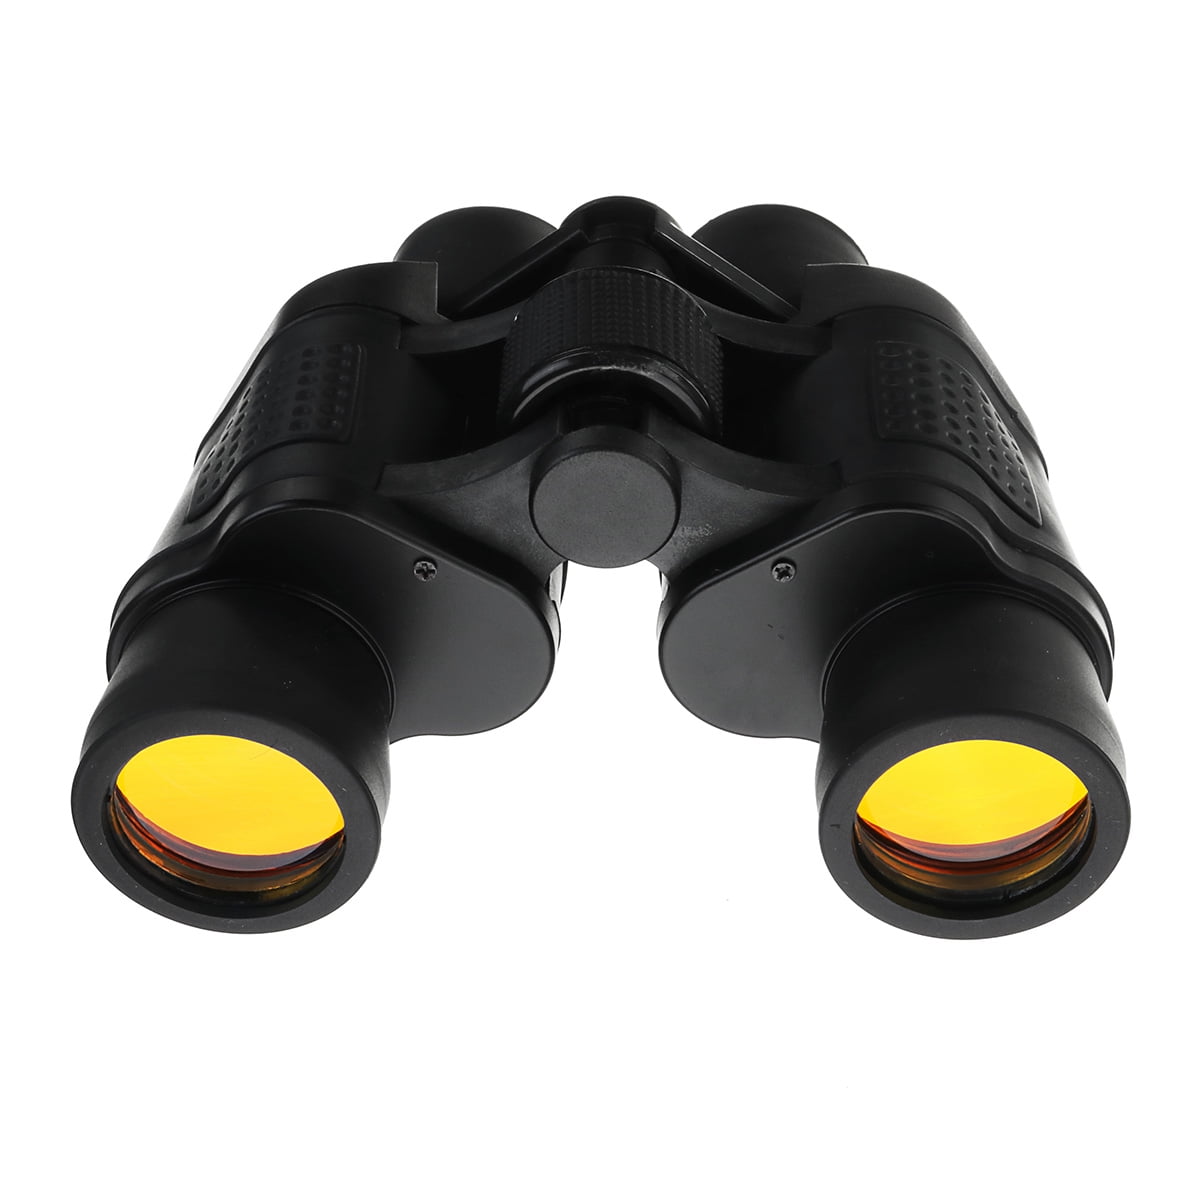 60x60 Coordinate HD Binoculars Day / Low-Light Night Vision Hunting Camping Outdoor Waterproof Telescope with Strap & Bag